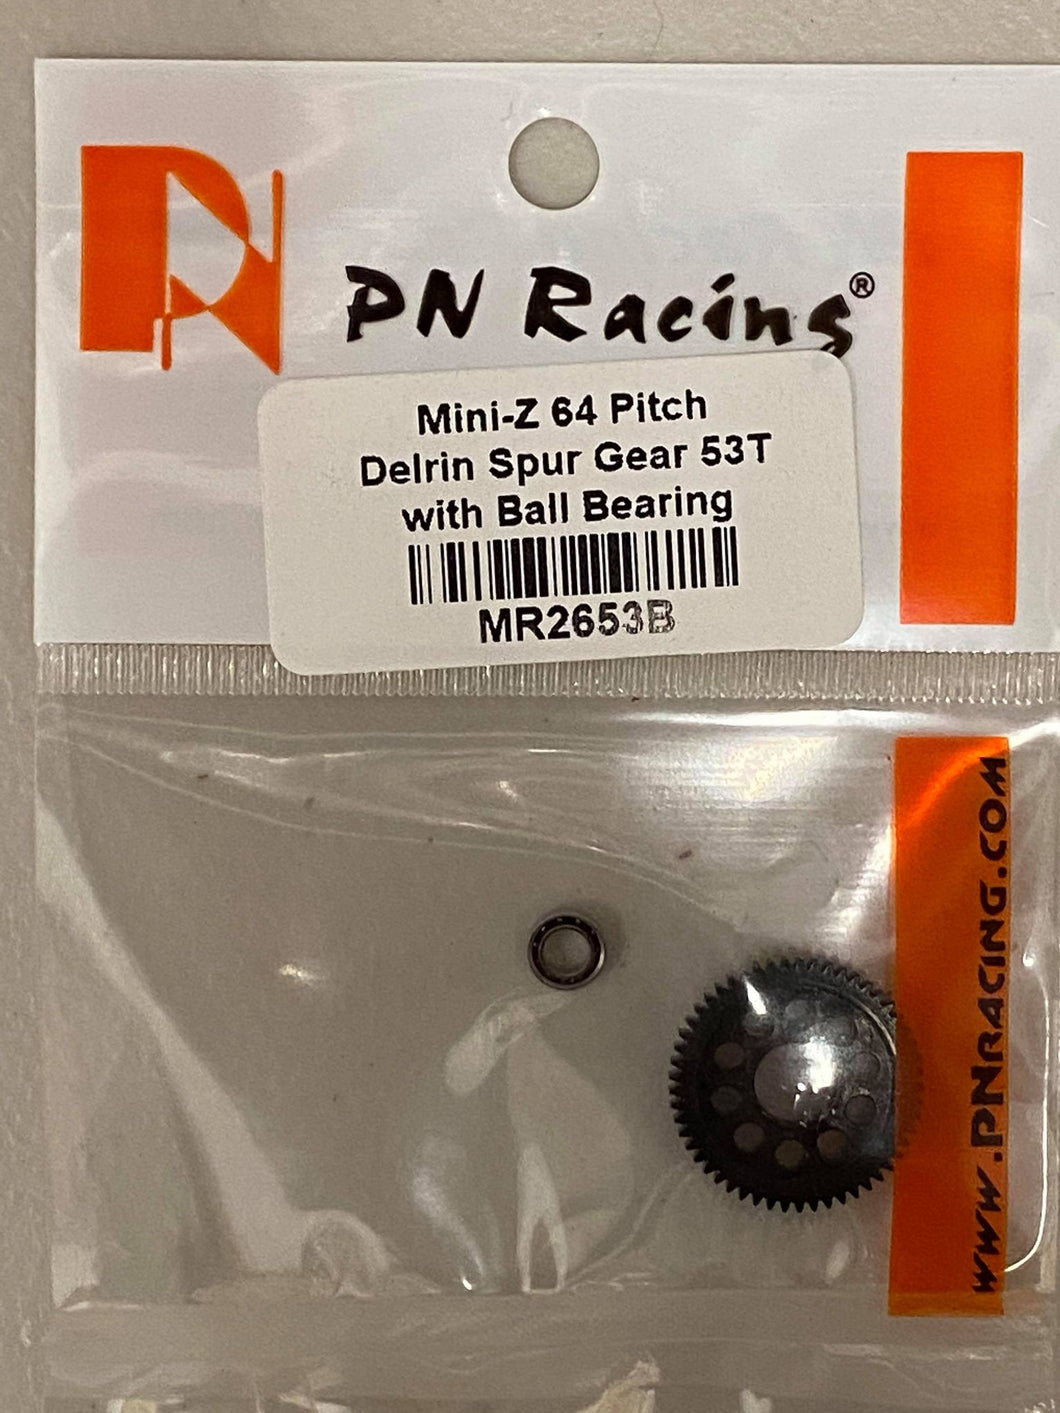 MR2653b PN Racing 64 Pitch Delrin Spur Gear 53T with Ball Bearing